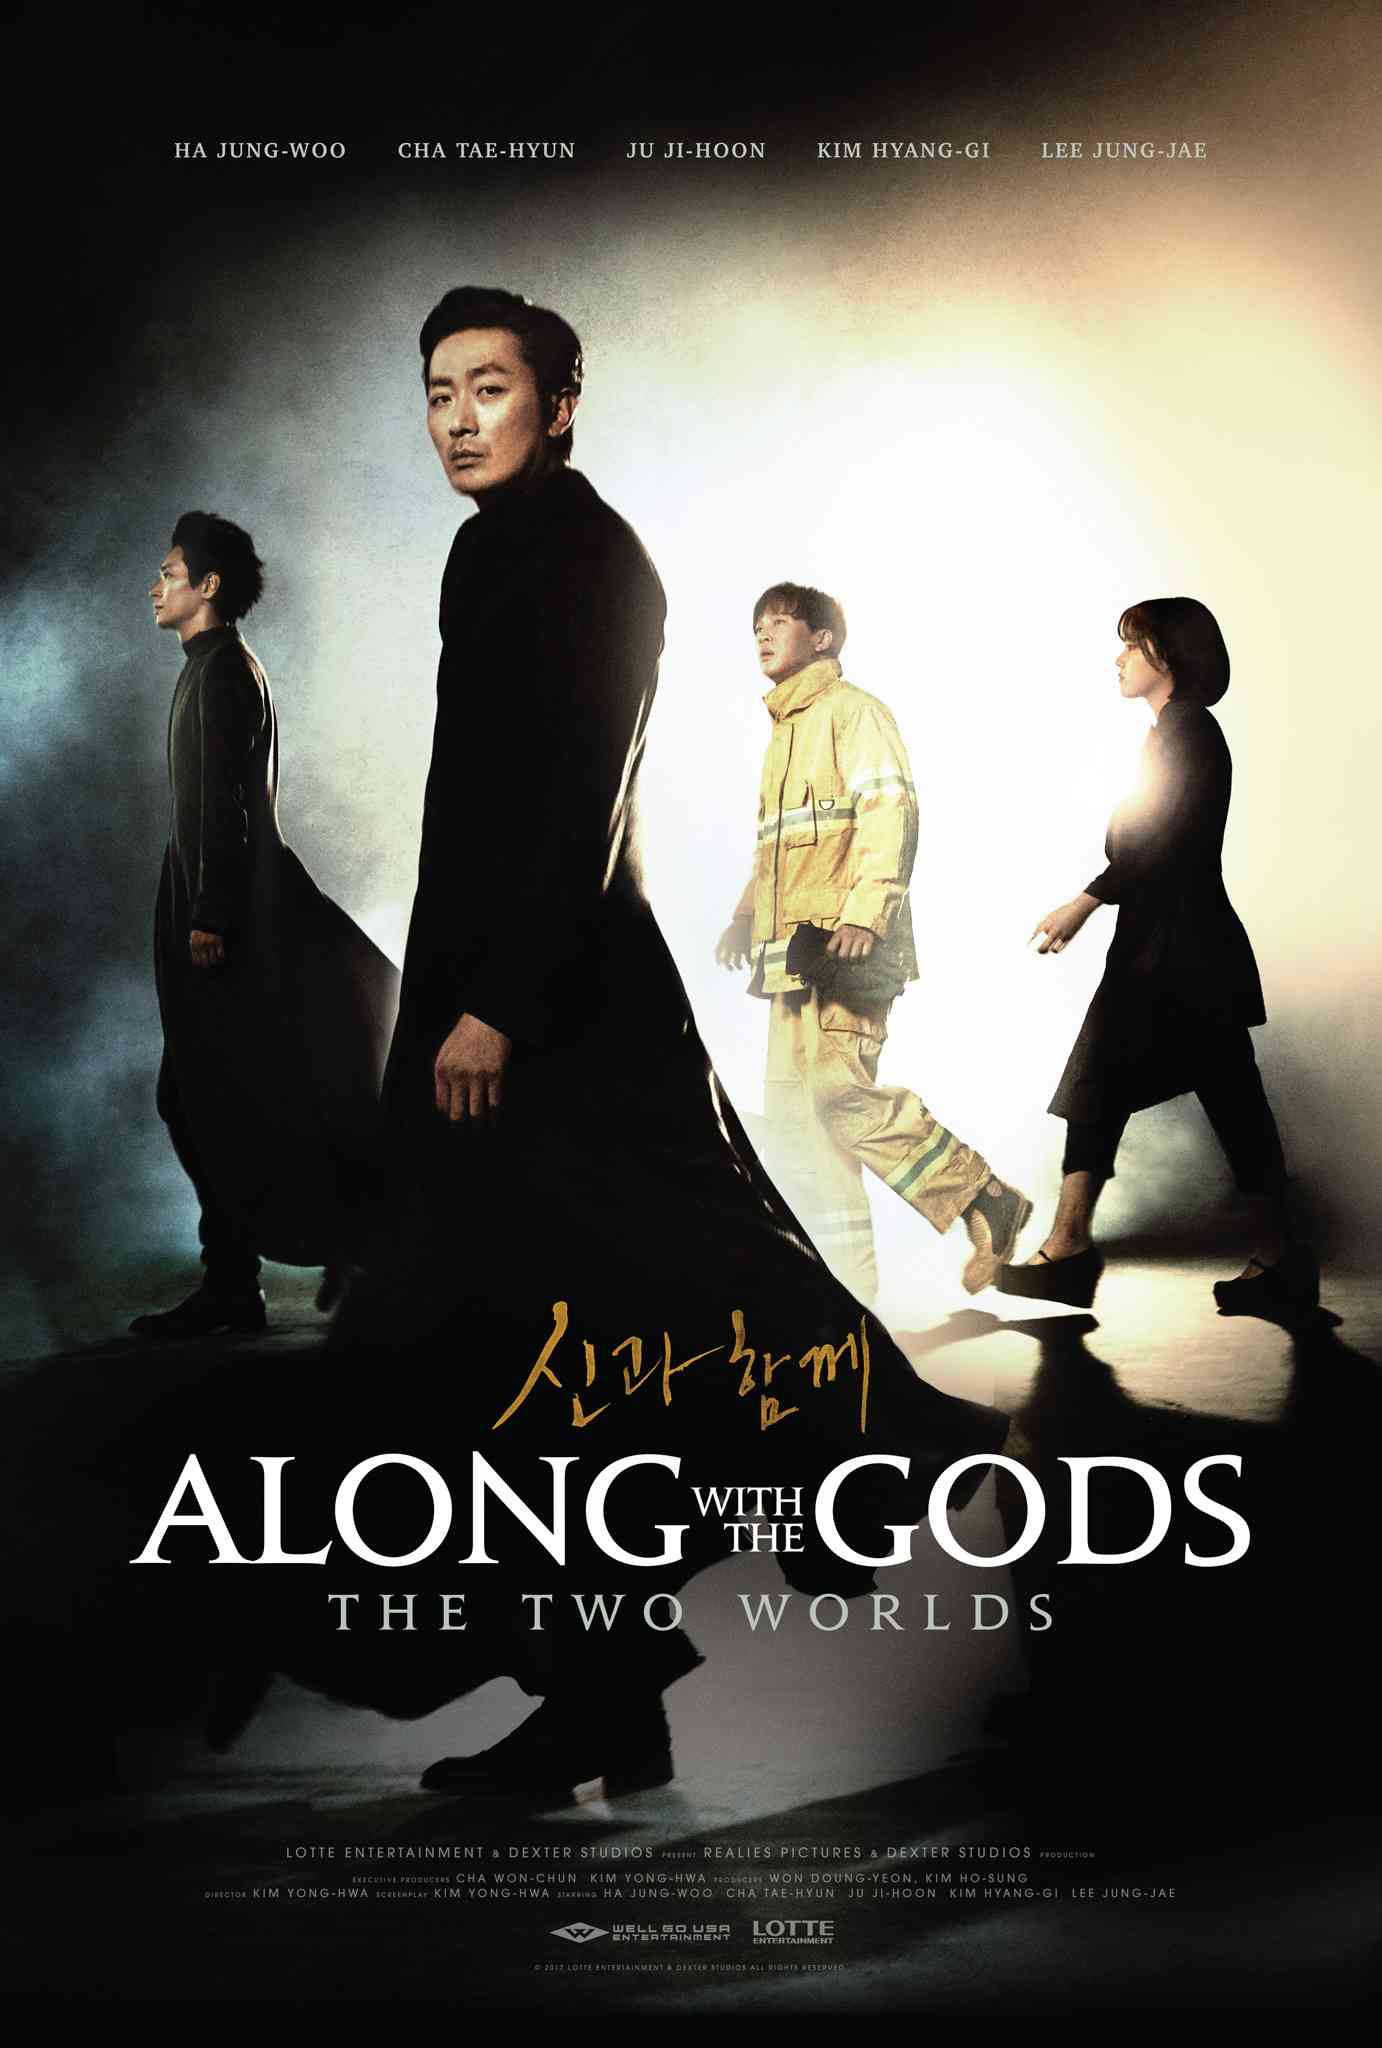 FULL MOVIE: Along With the Gods: The Two Worlds (2017)